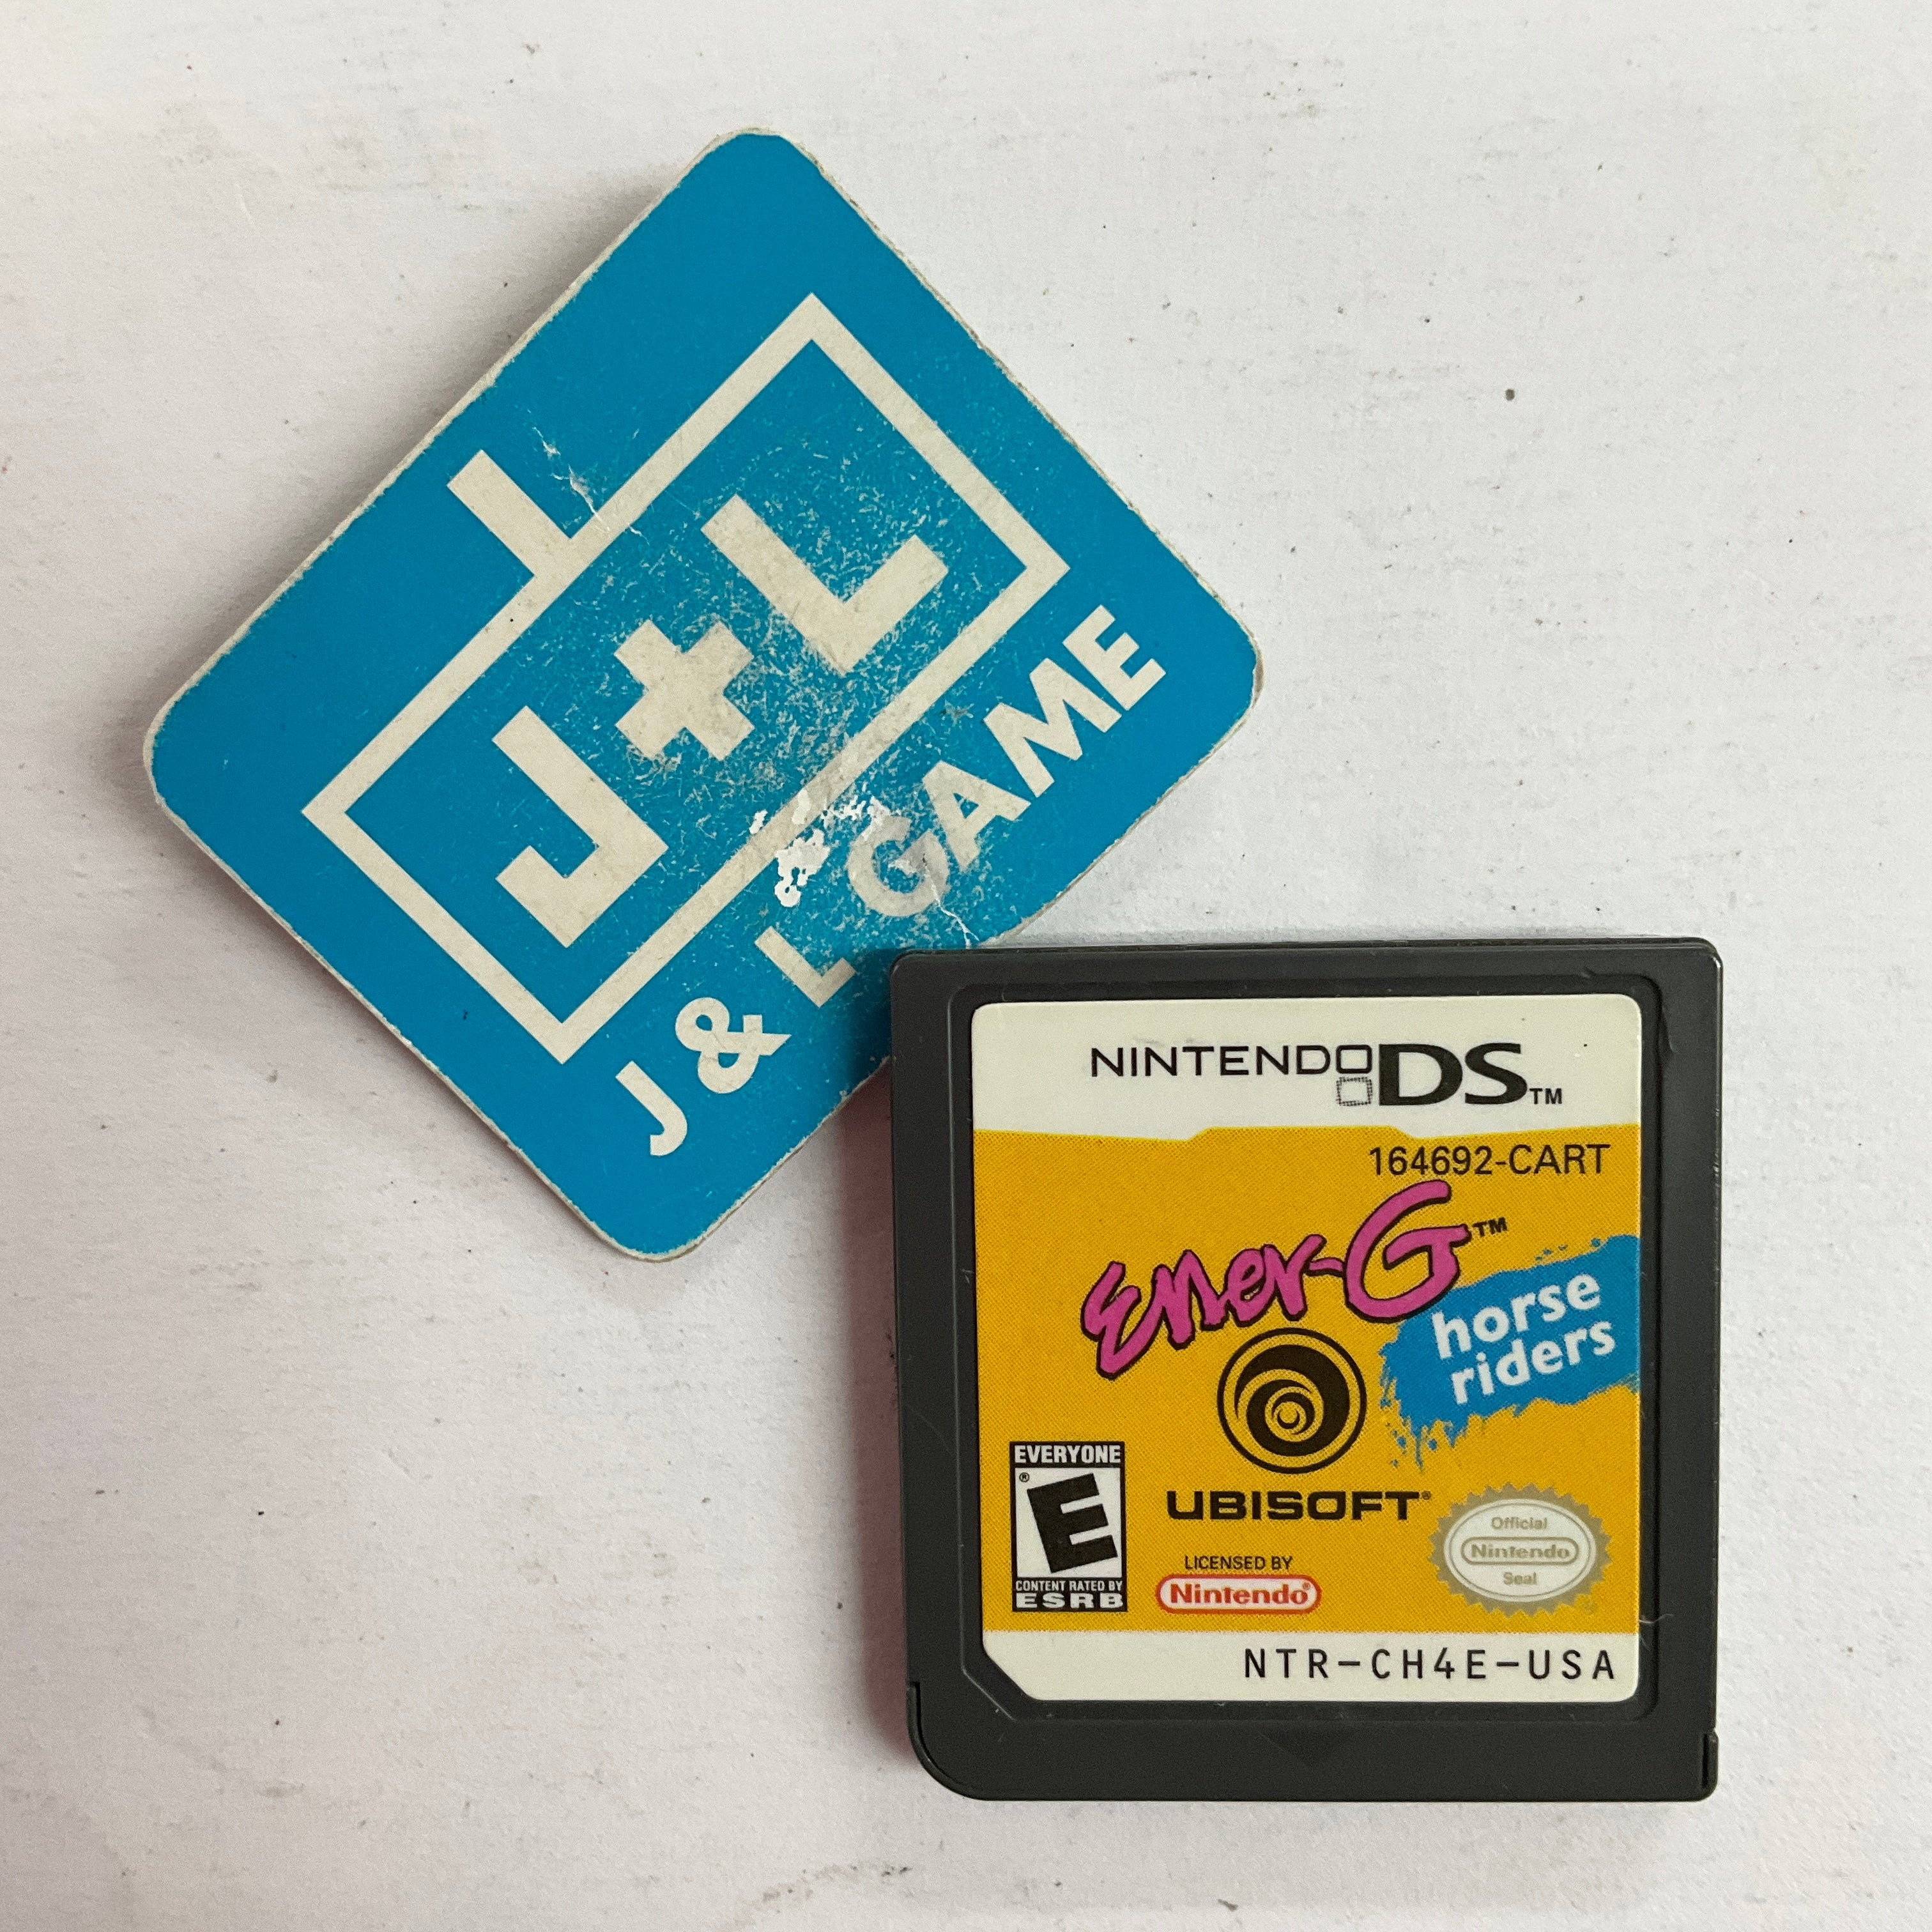 Ener-G Horse Riders - (NDS) Nintendo DS [Pre-Owned] Video Games Ubisoft   